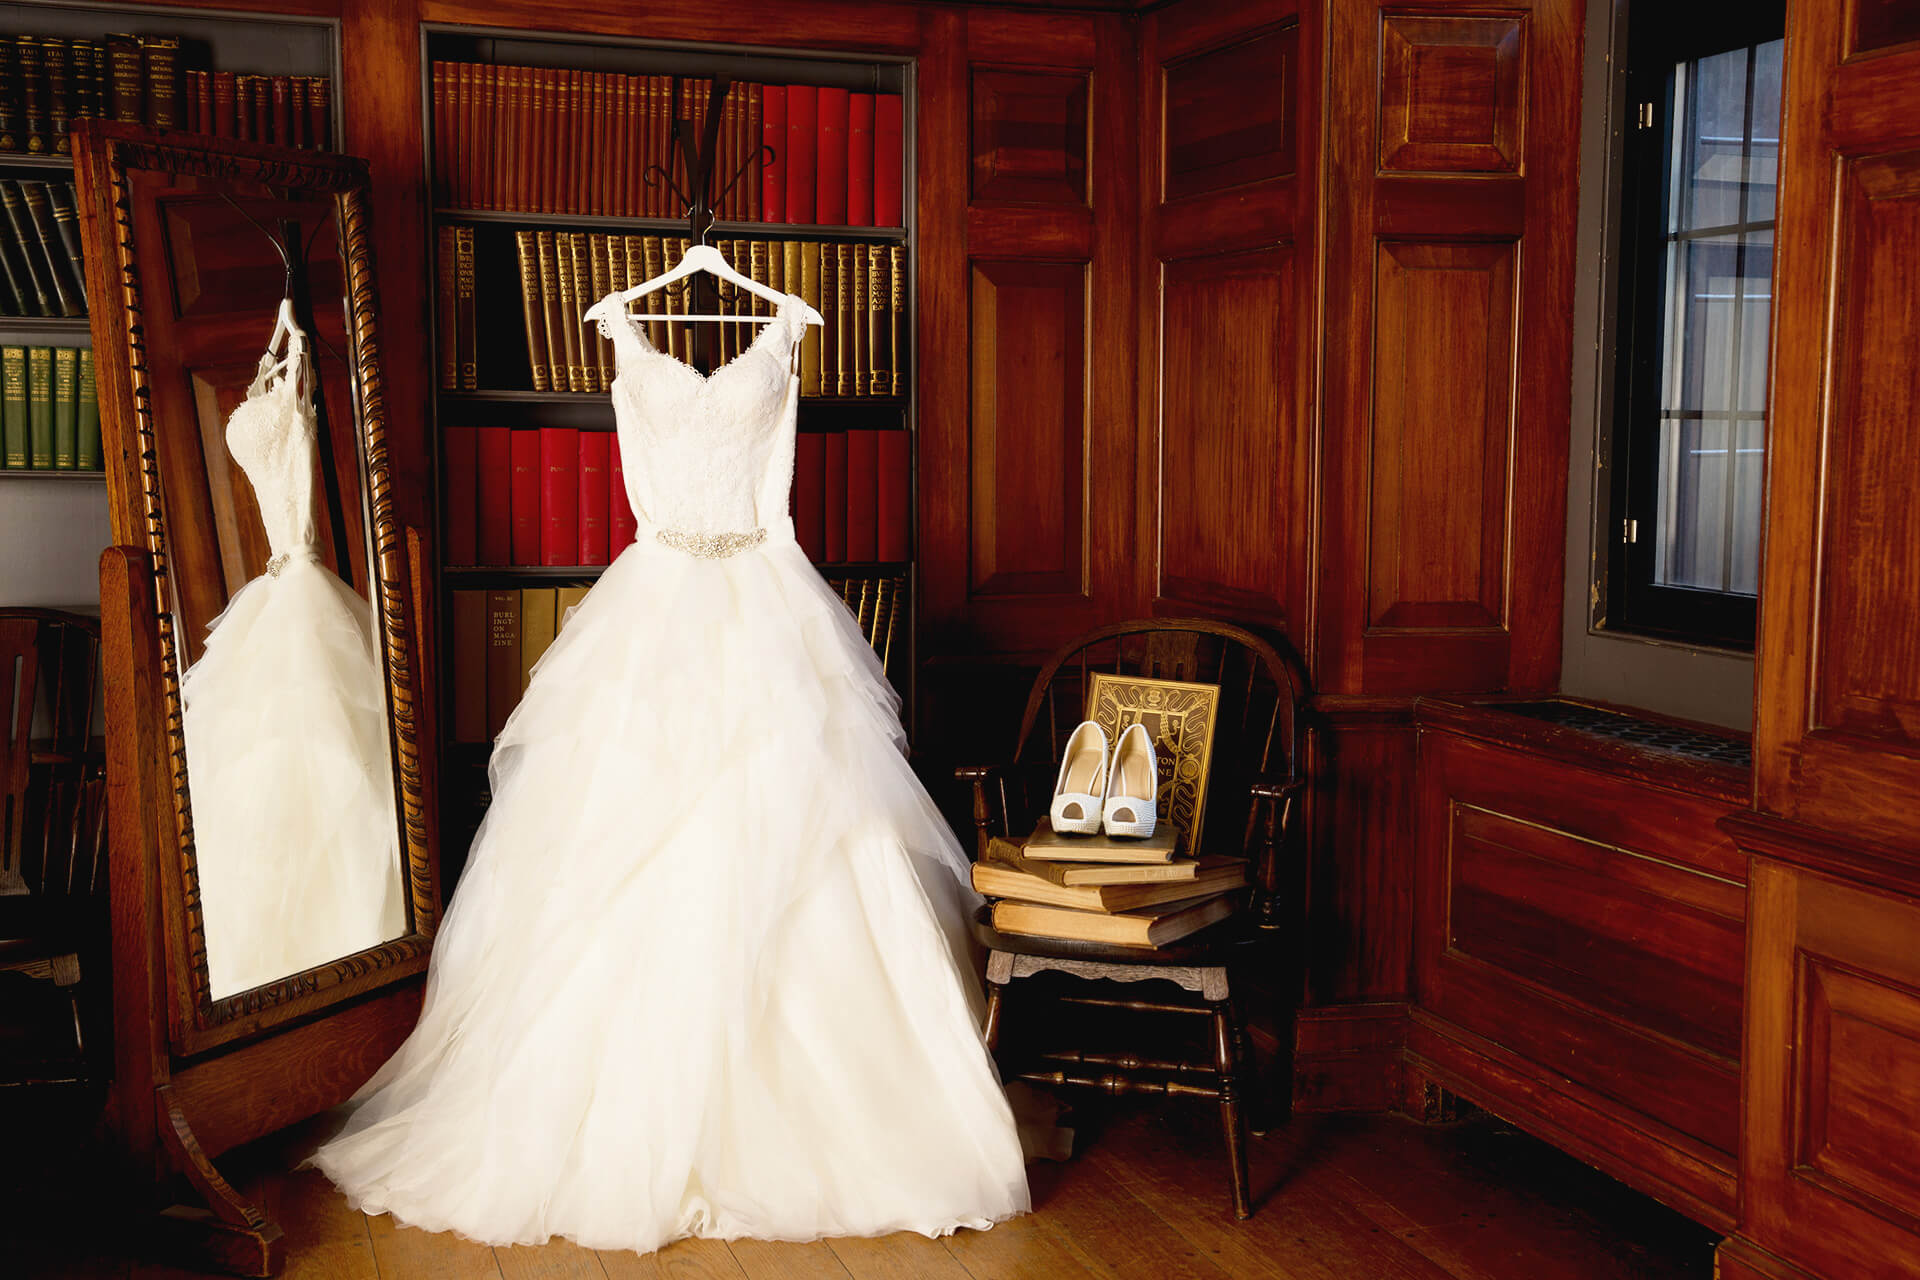 A bridal gown awaits the bride in a room with oak panelling, bookcases, a fireplace, and period tables and chairs.